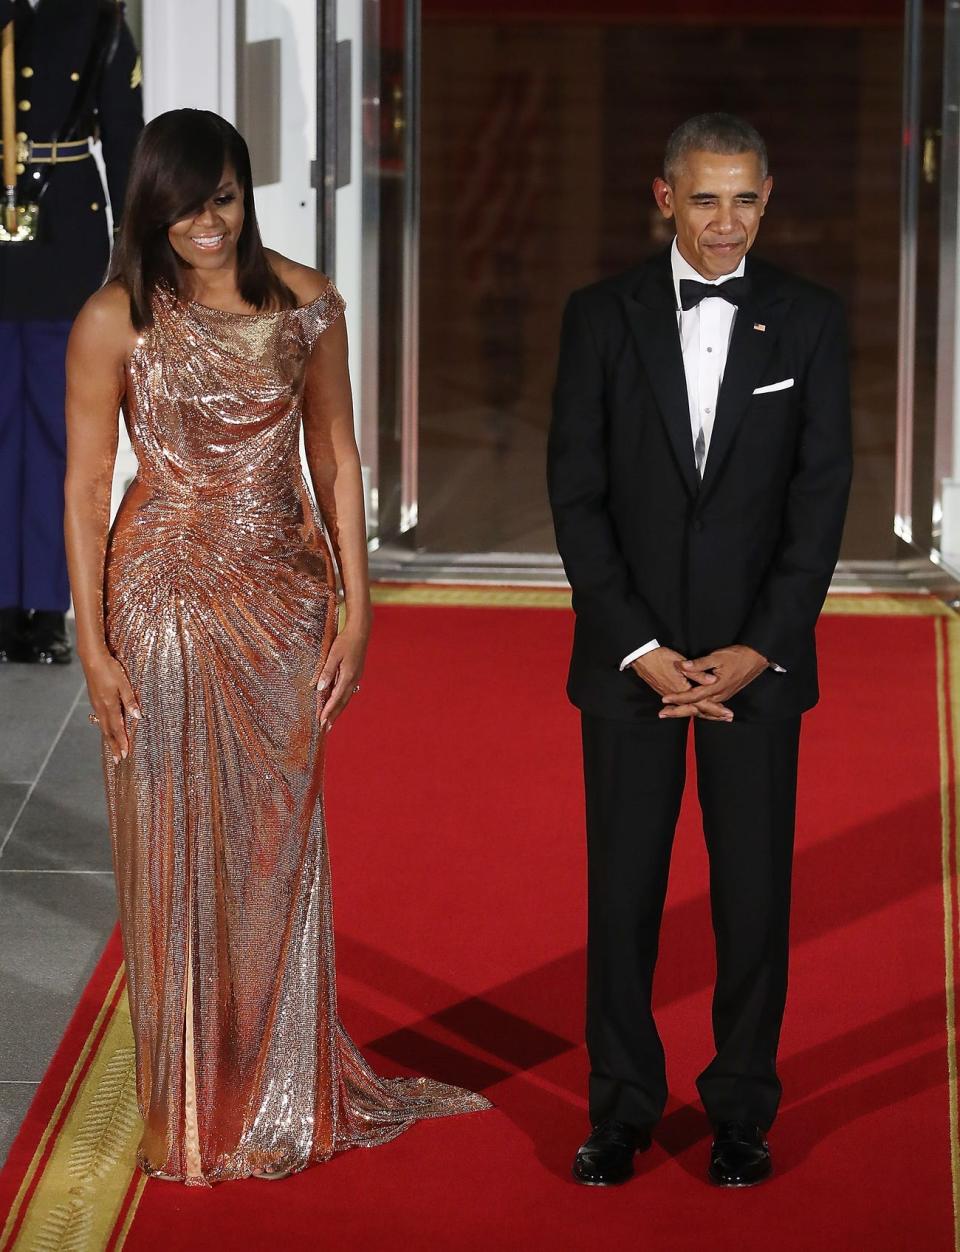 Michelle Obama wears a metallic Versache gown to a state dinner ini 2016.